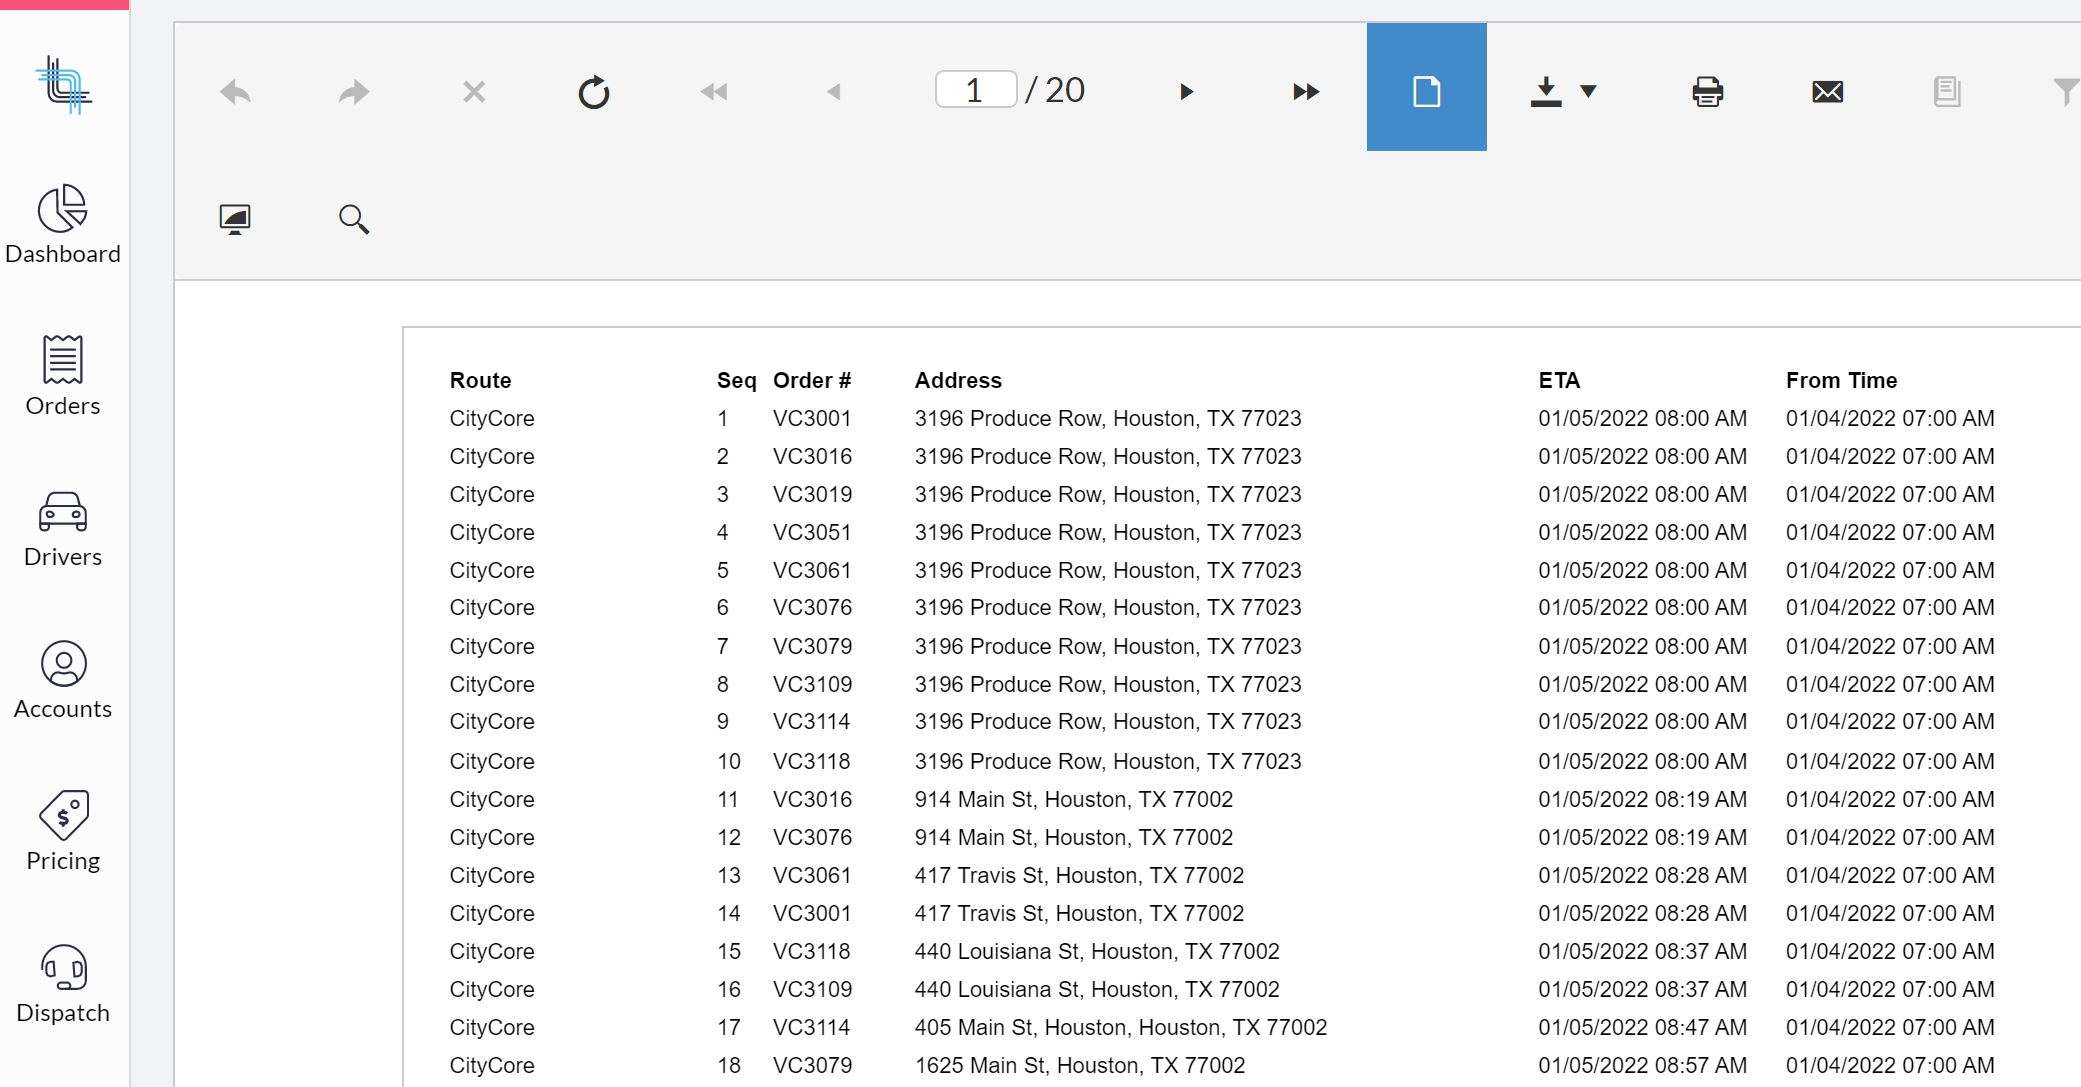 All sorts of reports and analytics are at your fingertips.